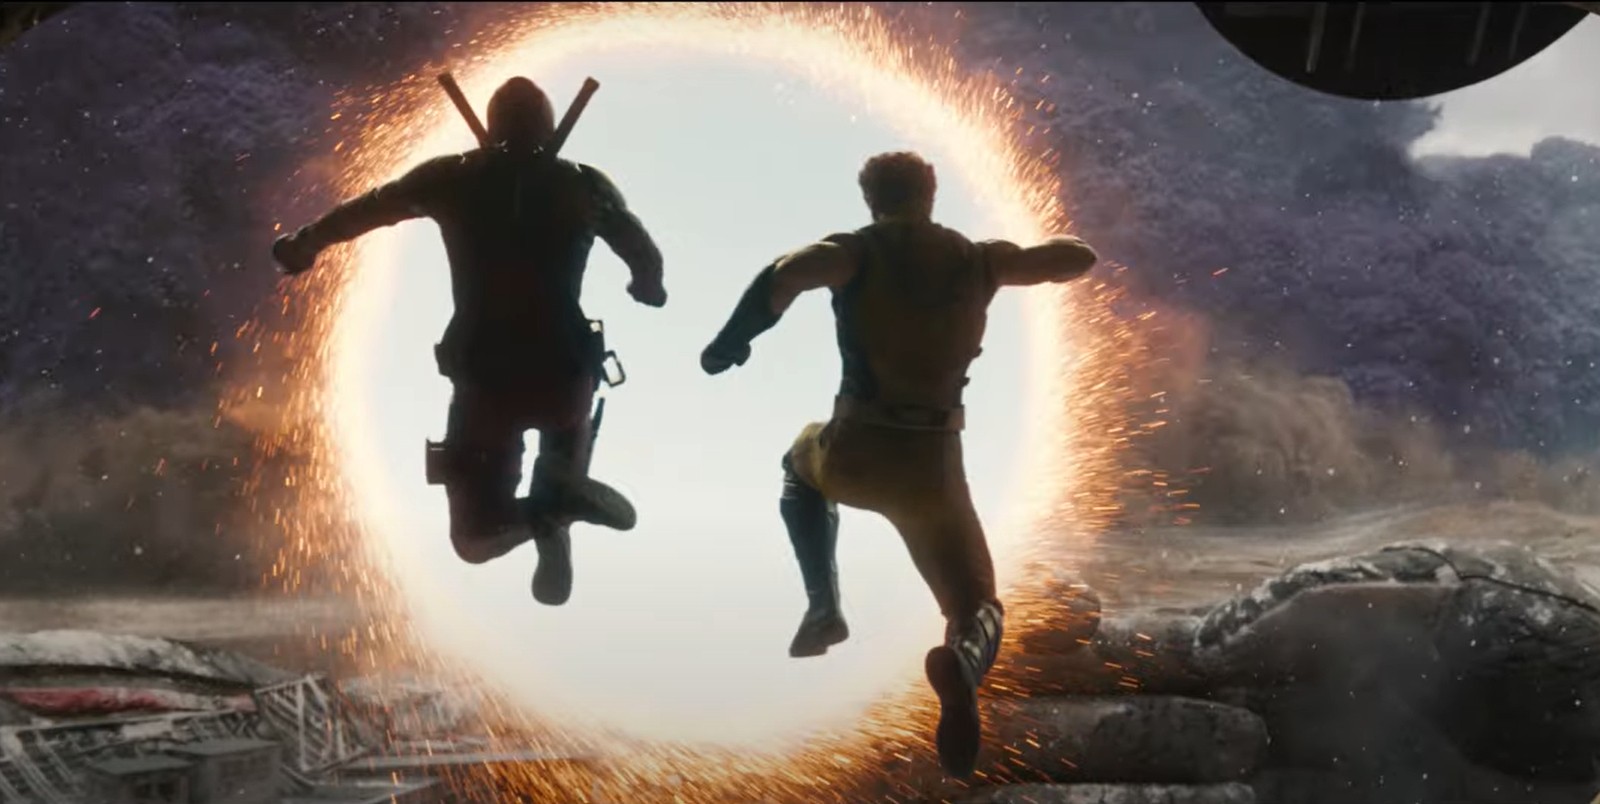 Deadpool 3 fan-made trailer features Ryan Reynolds and Hugh Jackman jumping through the portal into Avengers: Endgame